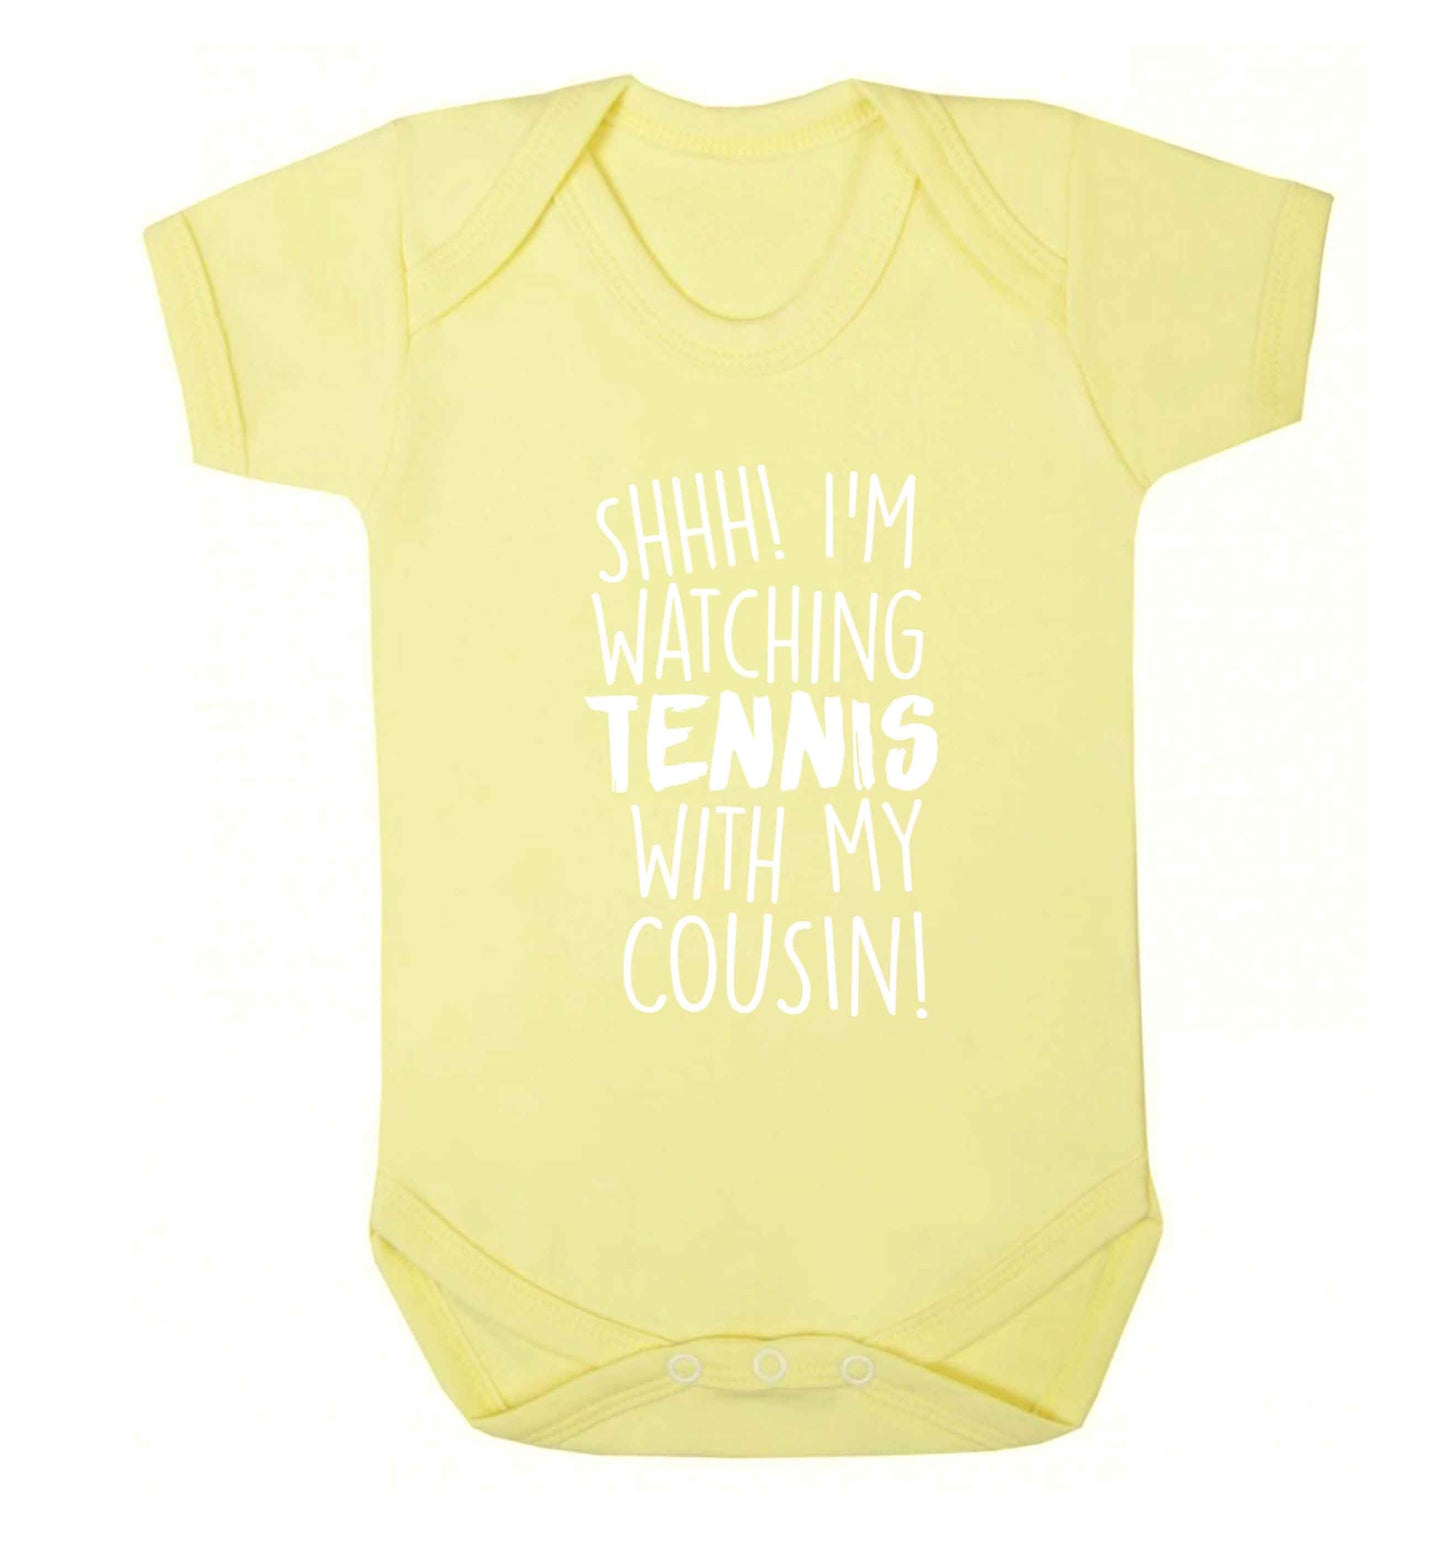 Shh! I'm watching tennis with my cousin! Baby Vest pale yellow 18-24 months